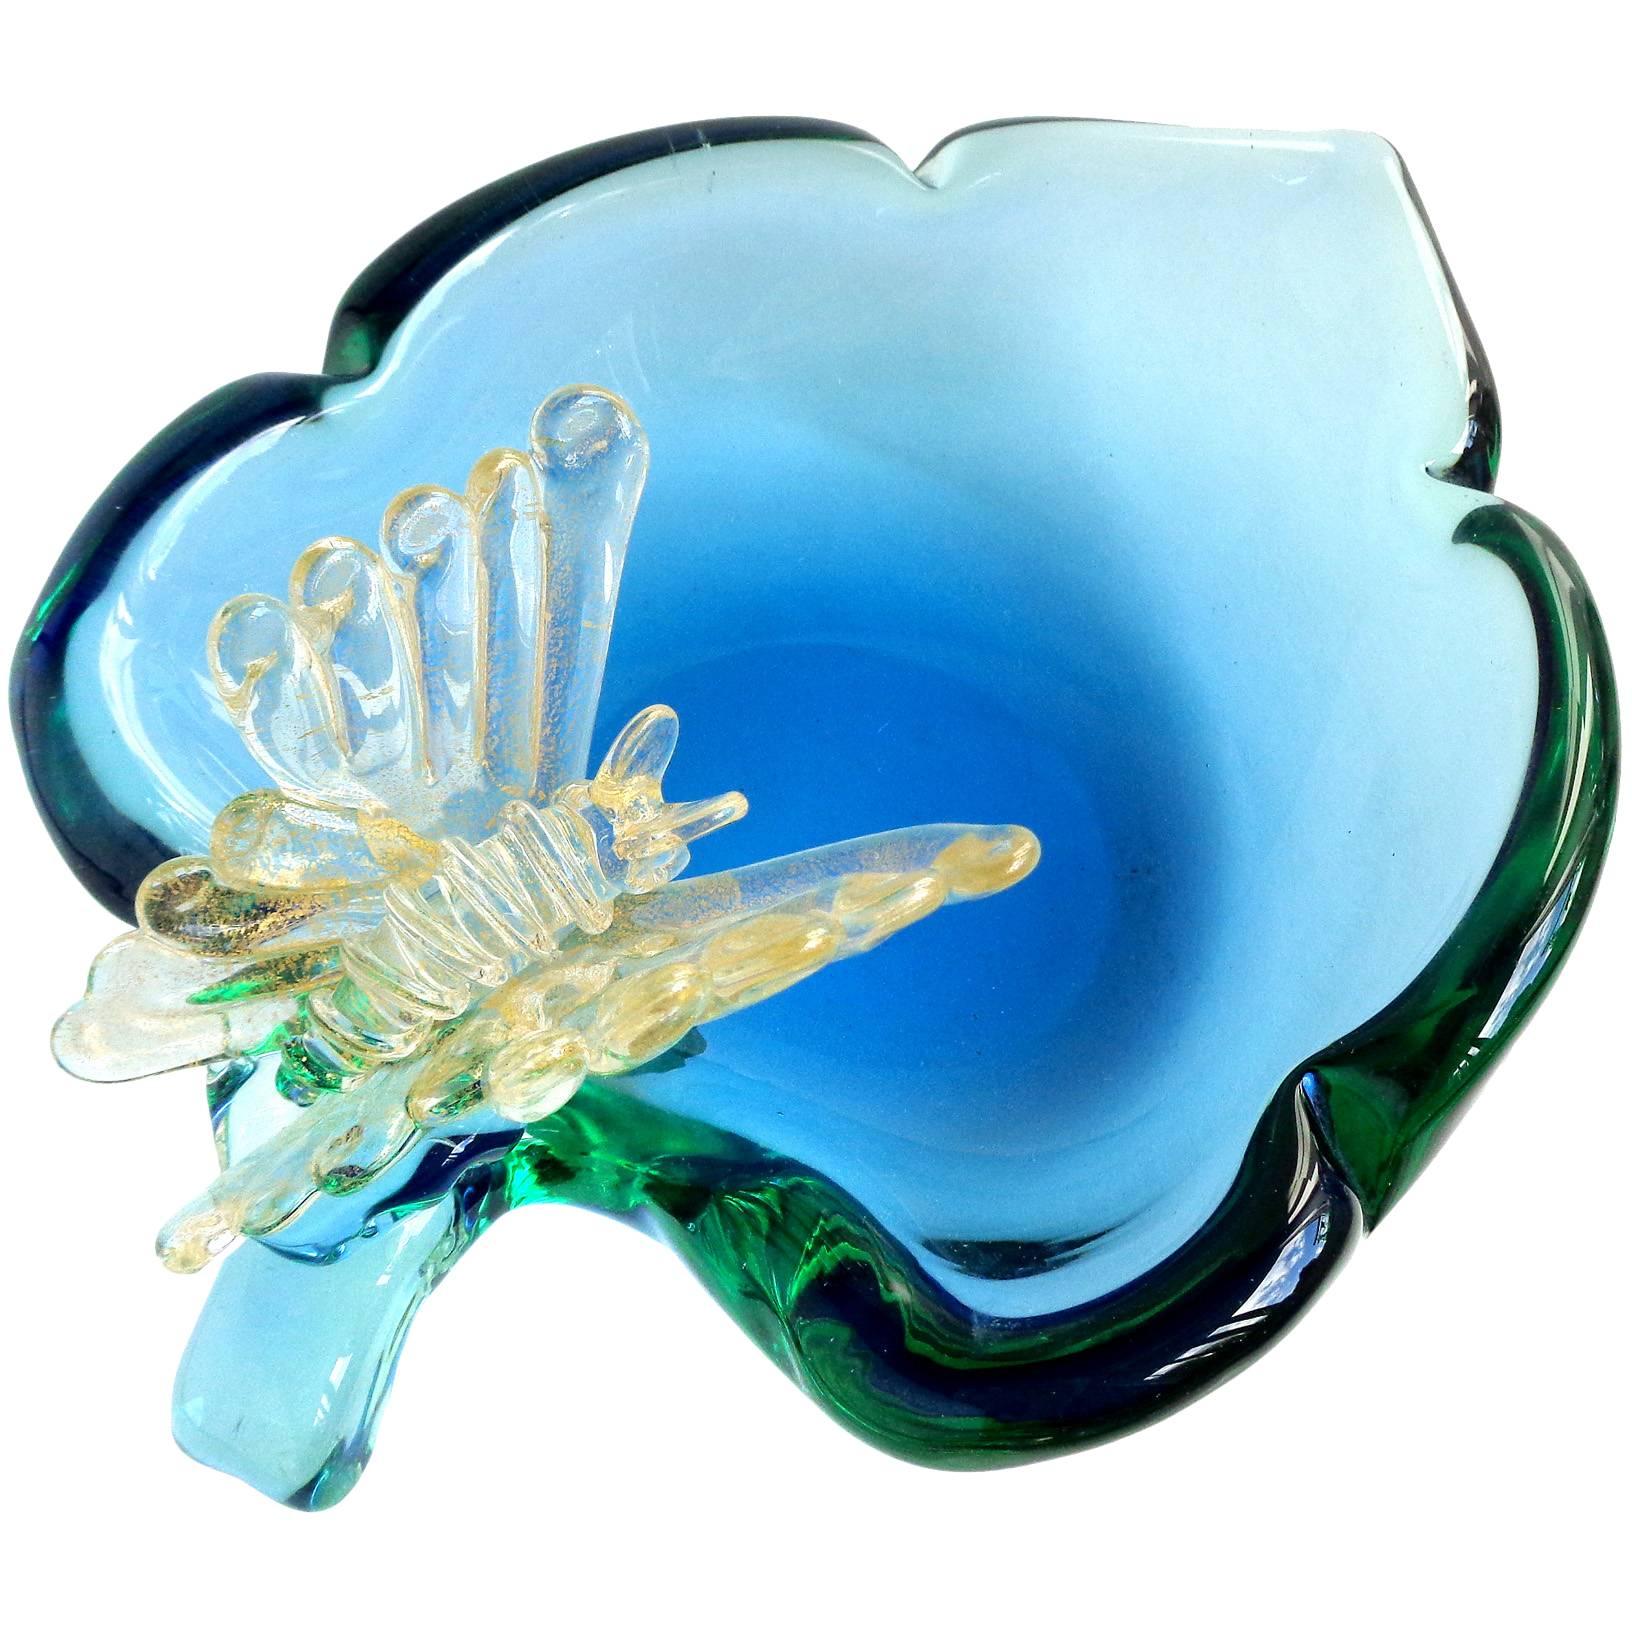 Beautiful vintage Murano hand blown Sommerso blue, with hints of green, Italian art glass bowl with applied gold butterfly. Attributed to the Seguso Vetri D' Arte Company. Still retains original Camer Glass, NY, Venice label (although worn). Would